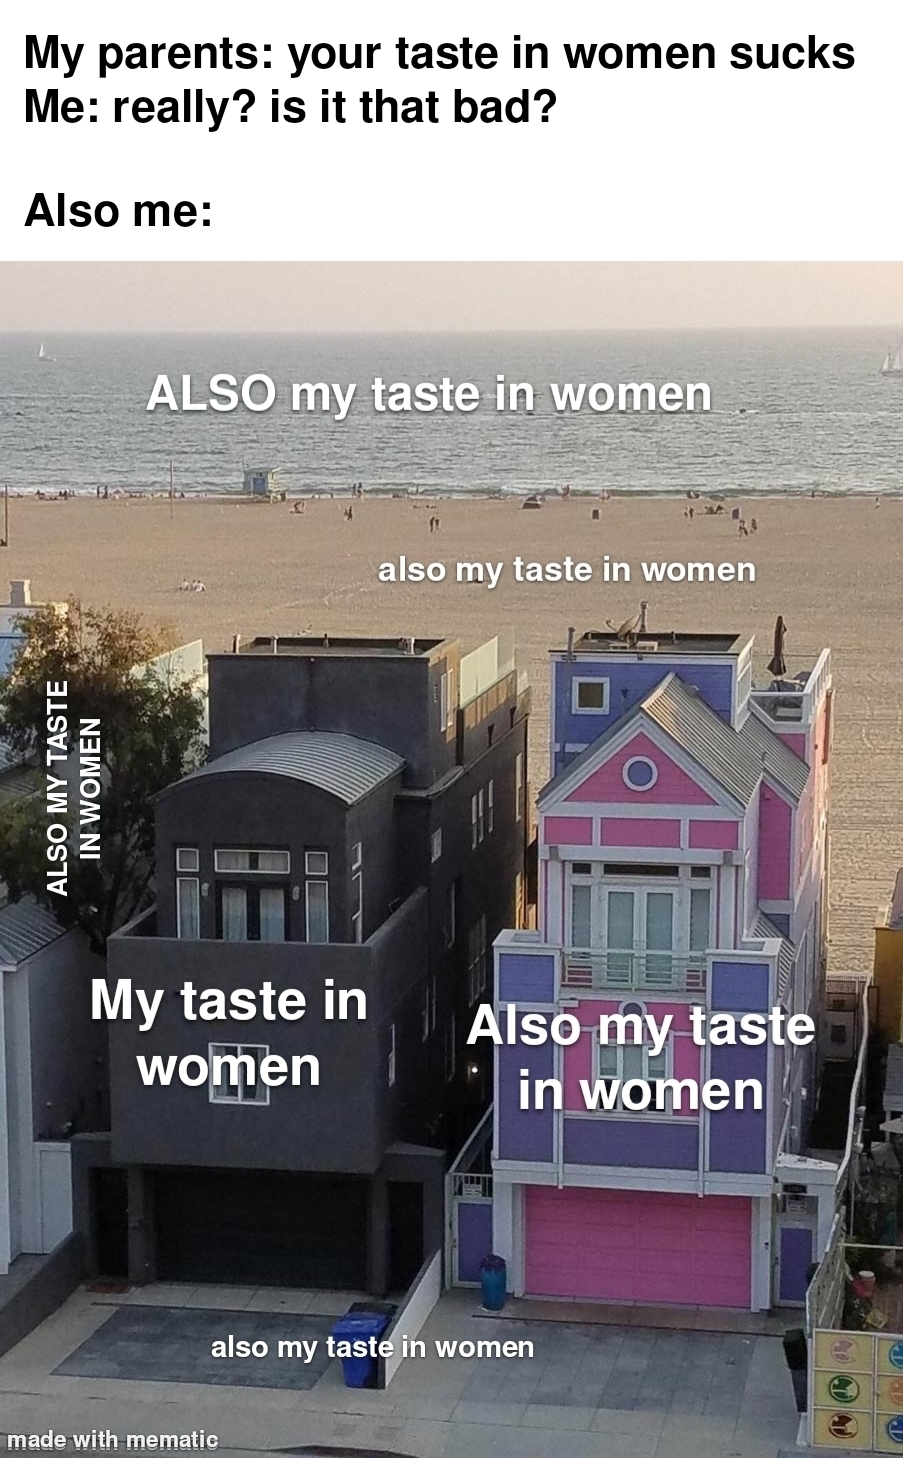 funny friday memes - palisades park - My parents your taste in women sucks Me really? is it that bad? Also me Also My Taste In Women Also my taste in women My taste in women also my taste in wome made with mematic Also my taste in women also my taste in w